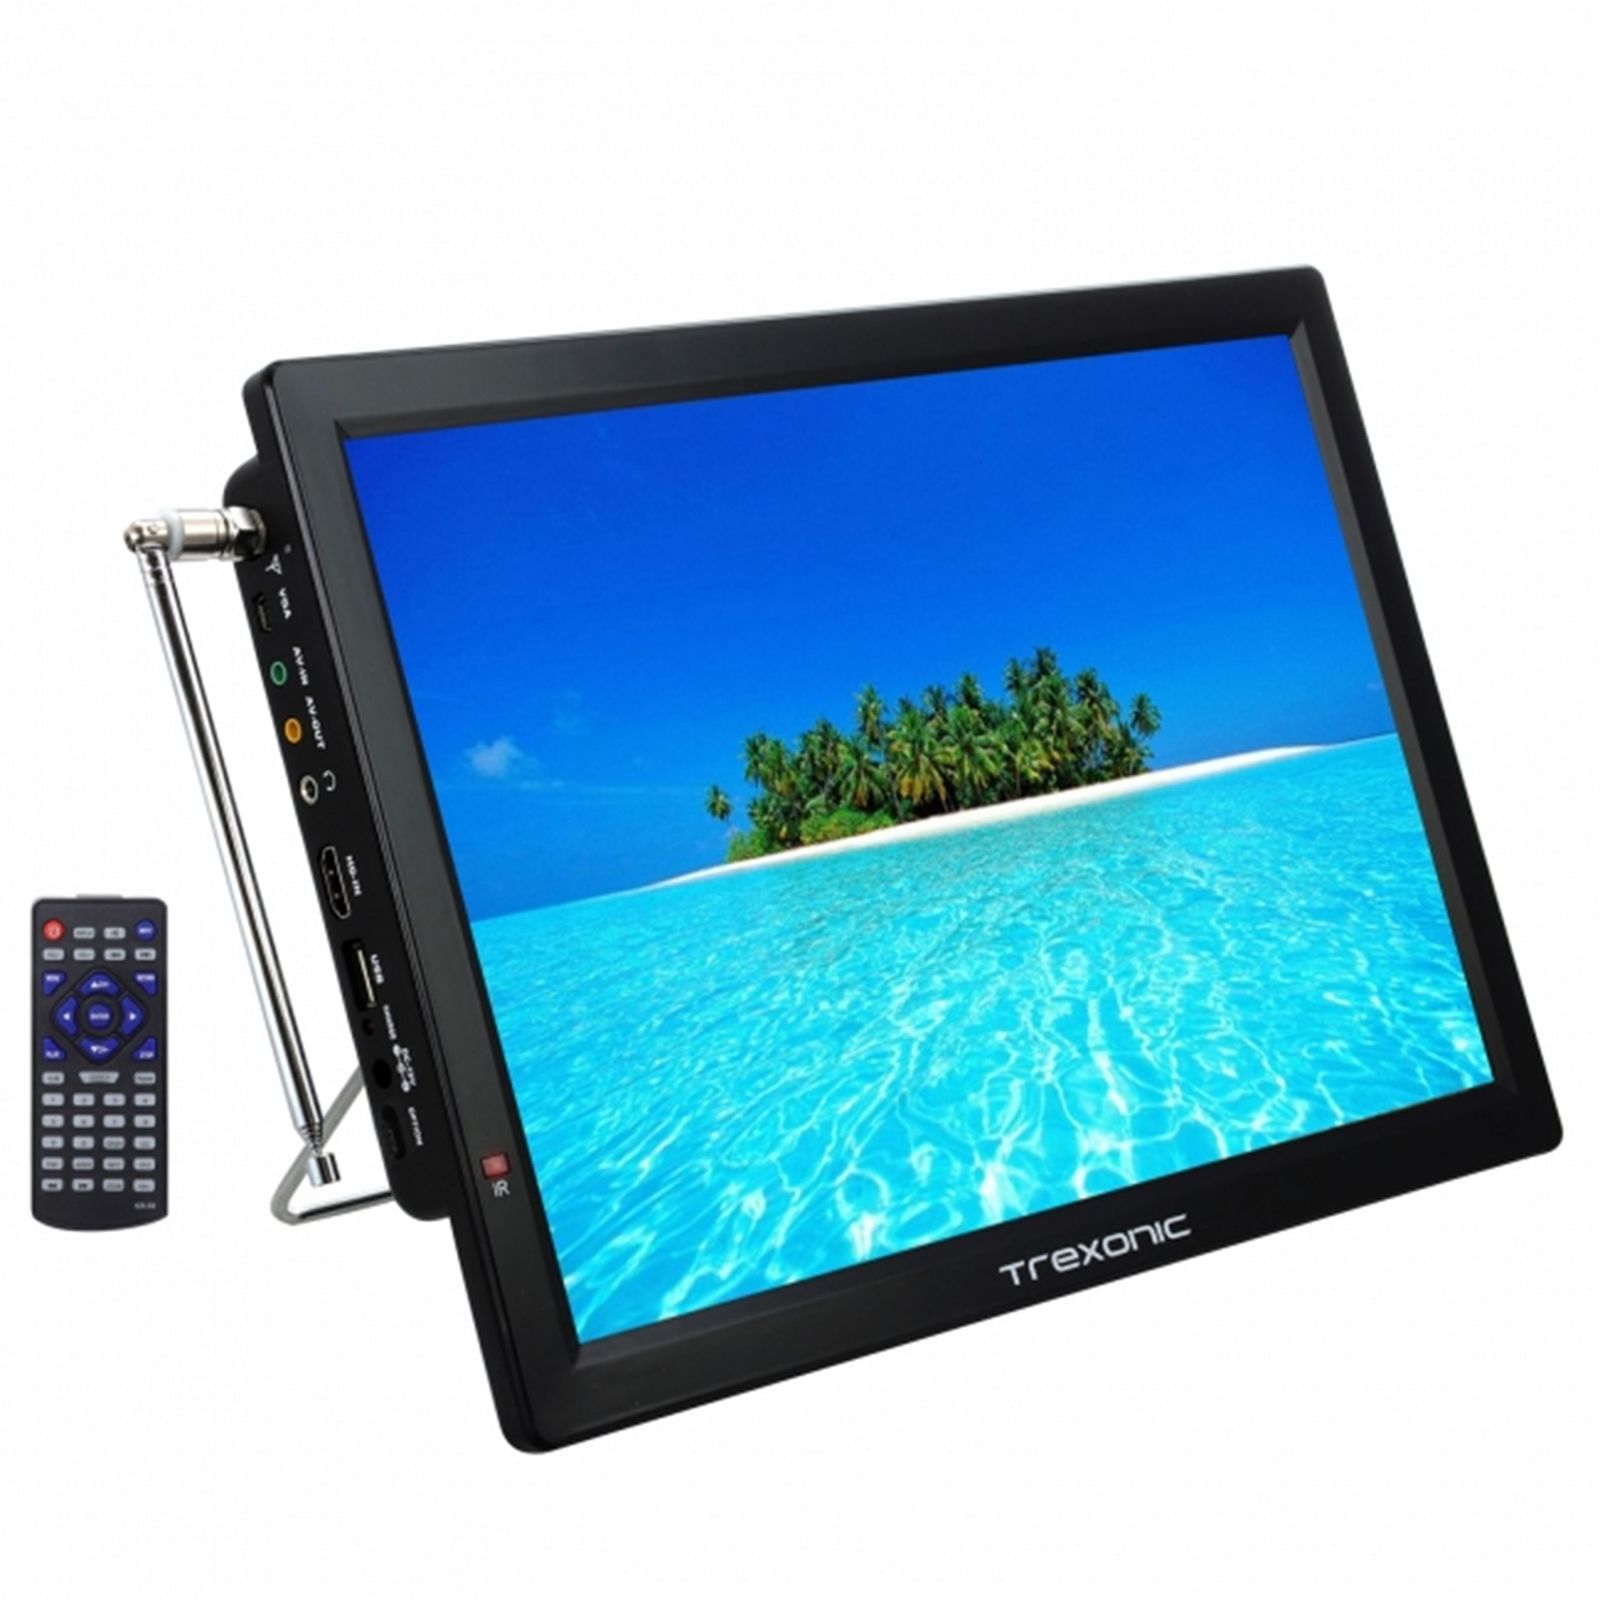 Primary image for Reconditioned Trexonic Portable Rechargeable 14" LED TV With HDMI, SD/MMC, USB,